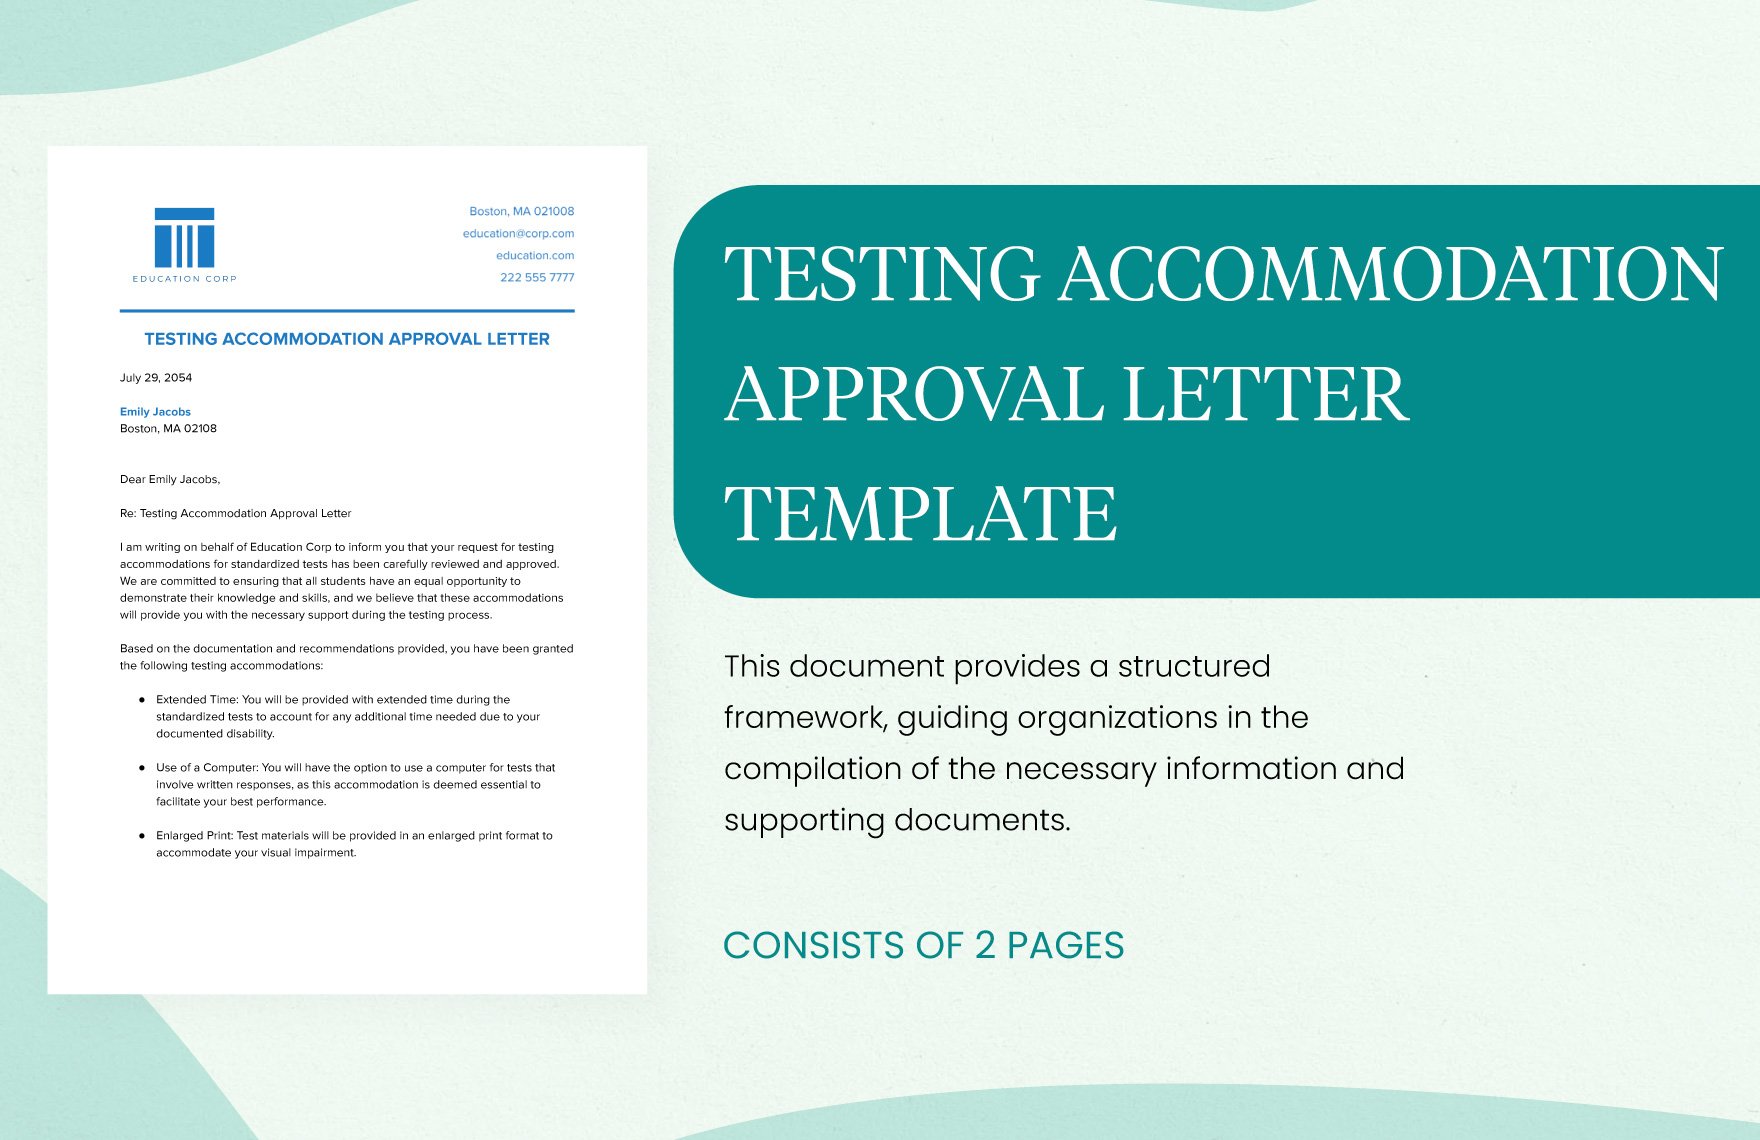 Testing Accommodation Approval Letter Template